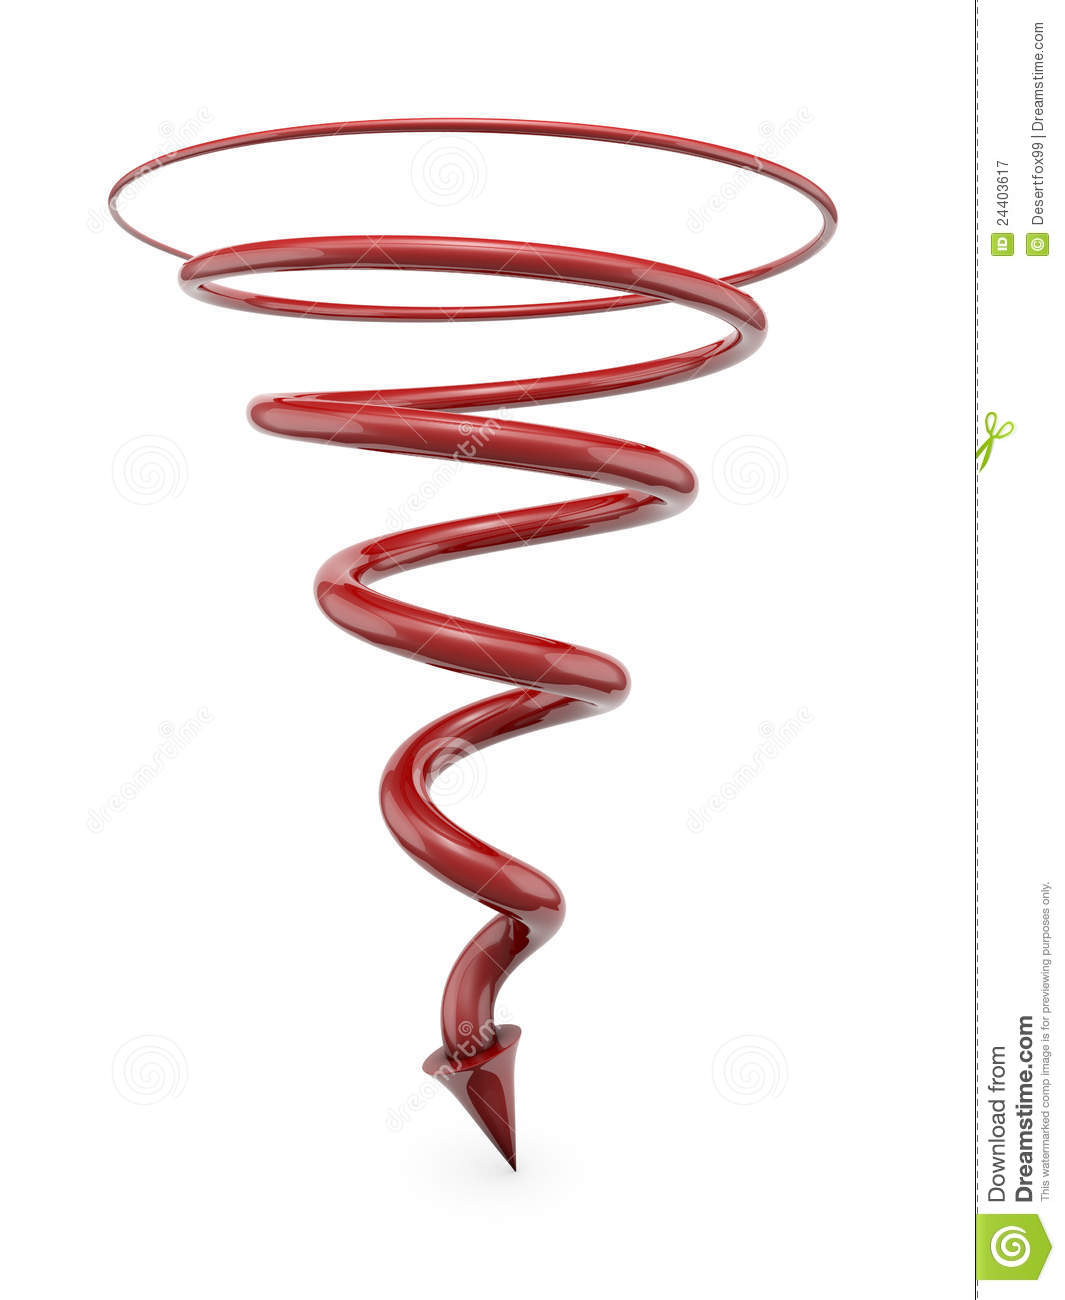 Red Spiral Line With Arrow Royalty Free Stock Photography   Image